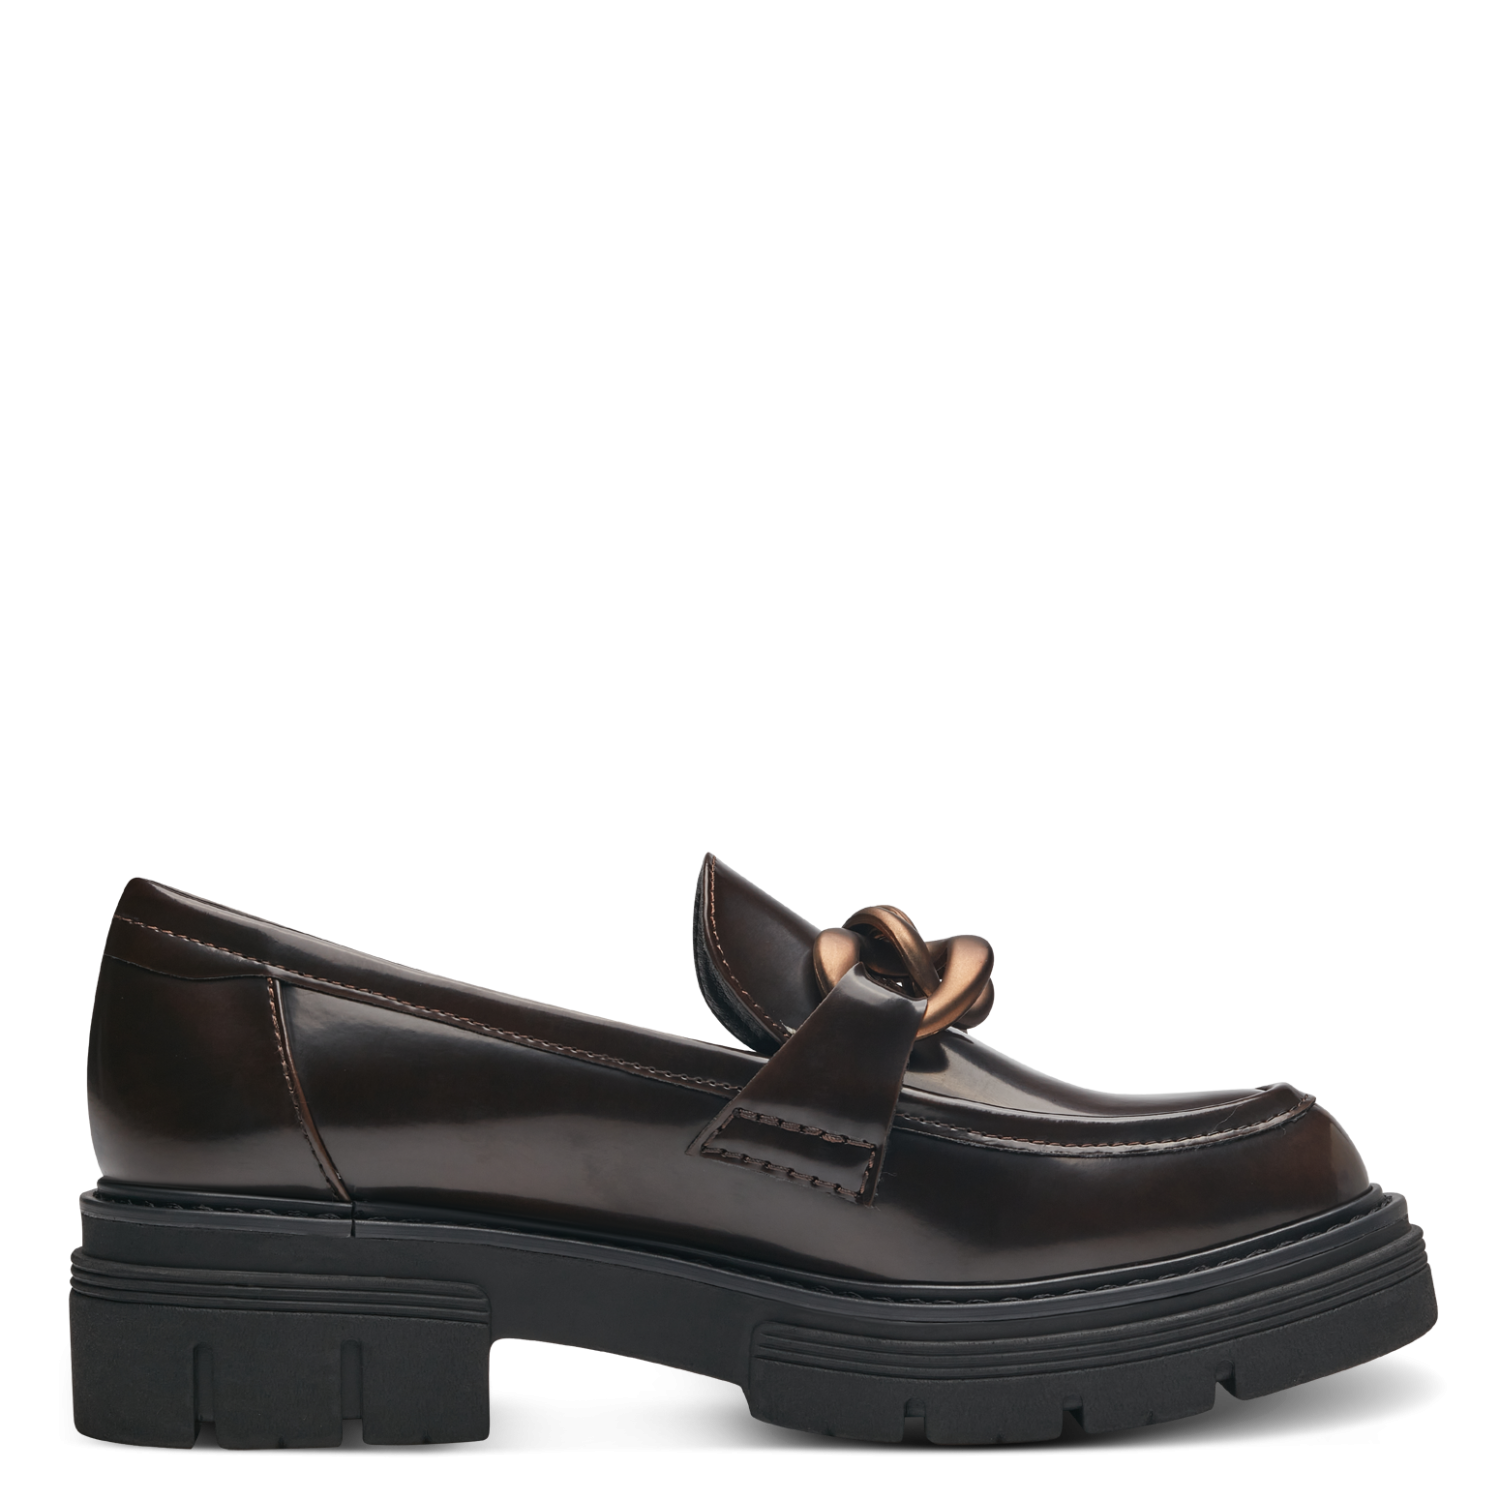 Marco Tozzi 24705 Loafer - Cafe